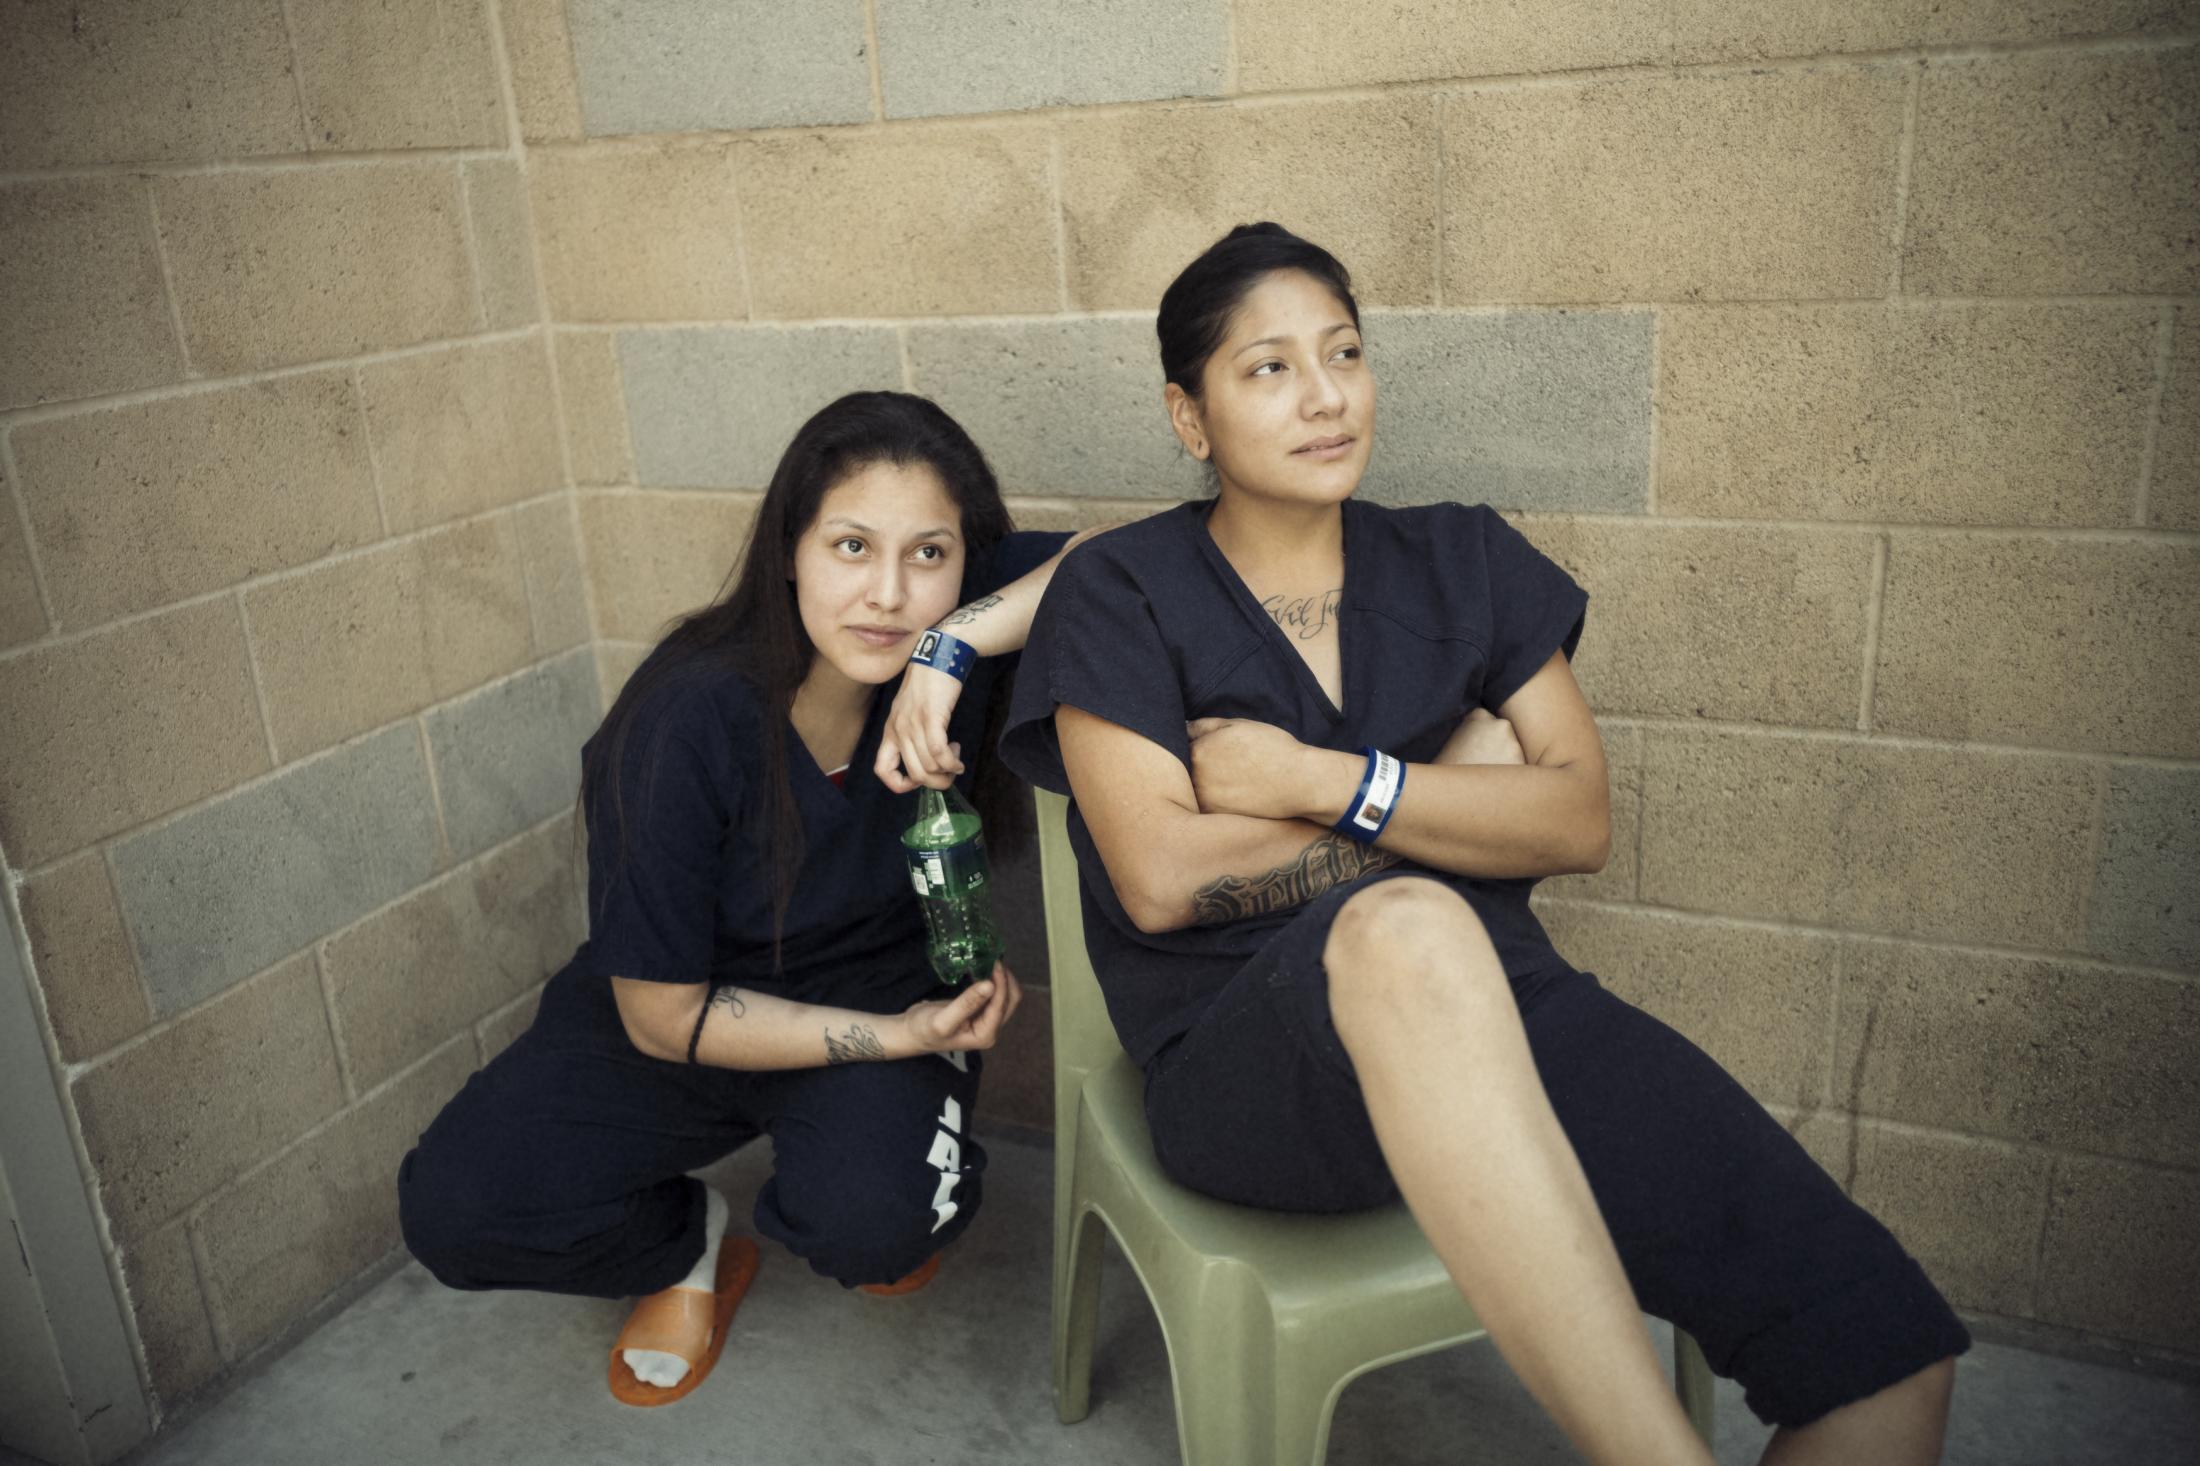 Mothers & Sisters - Pamela Hernandez and Kathleen Salinas sit together in the...